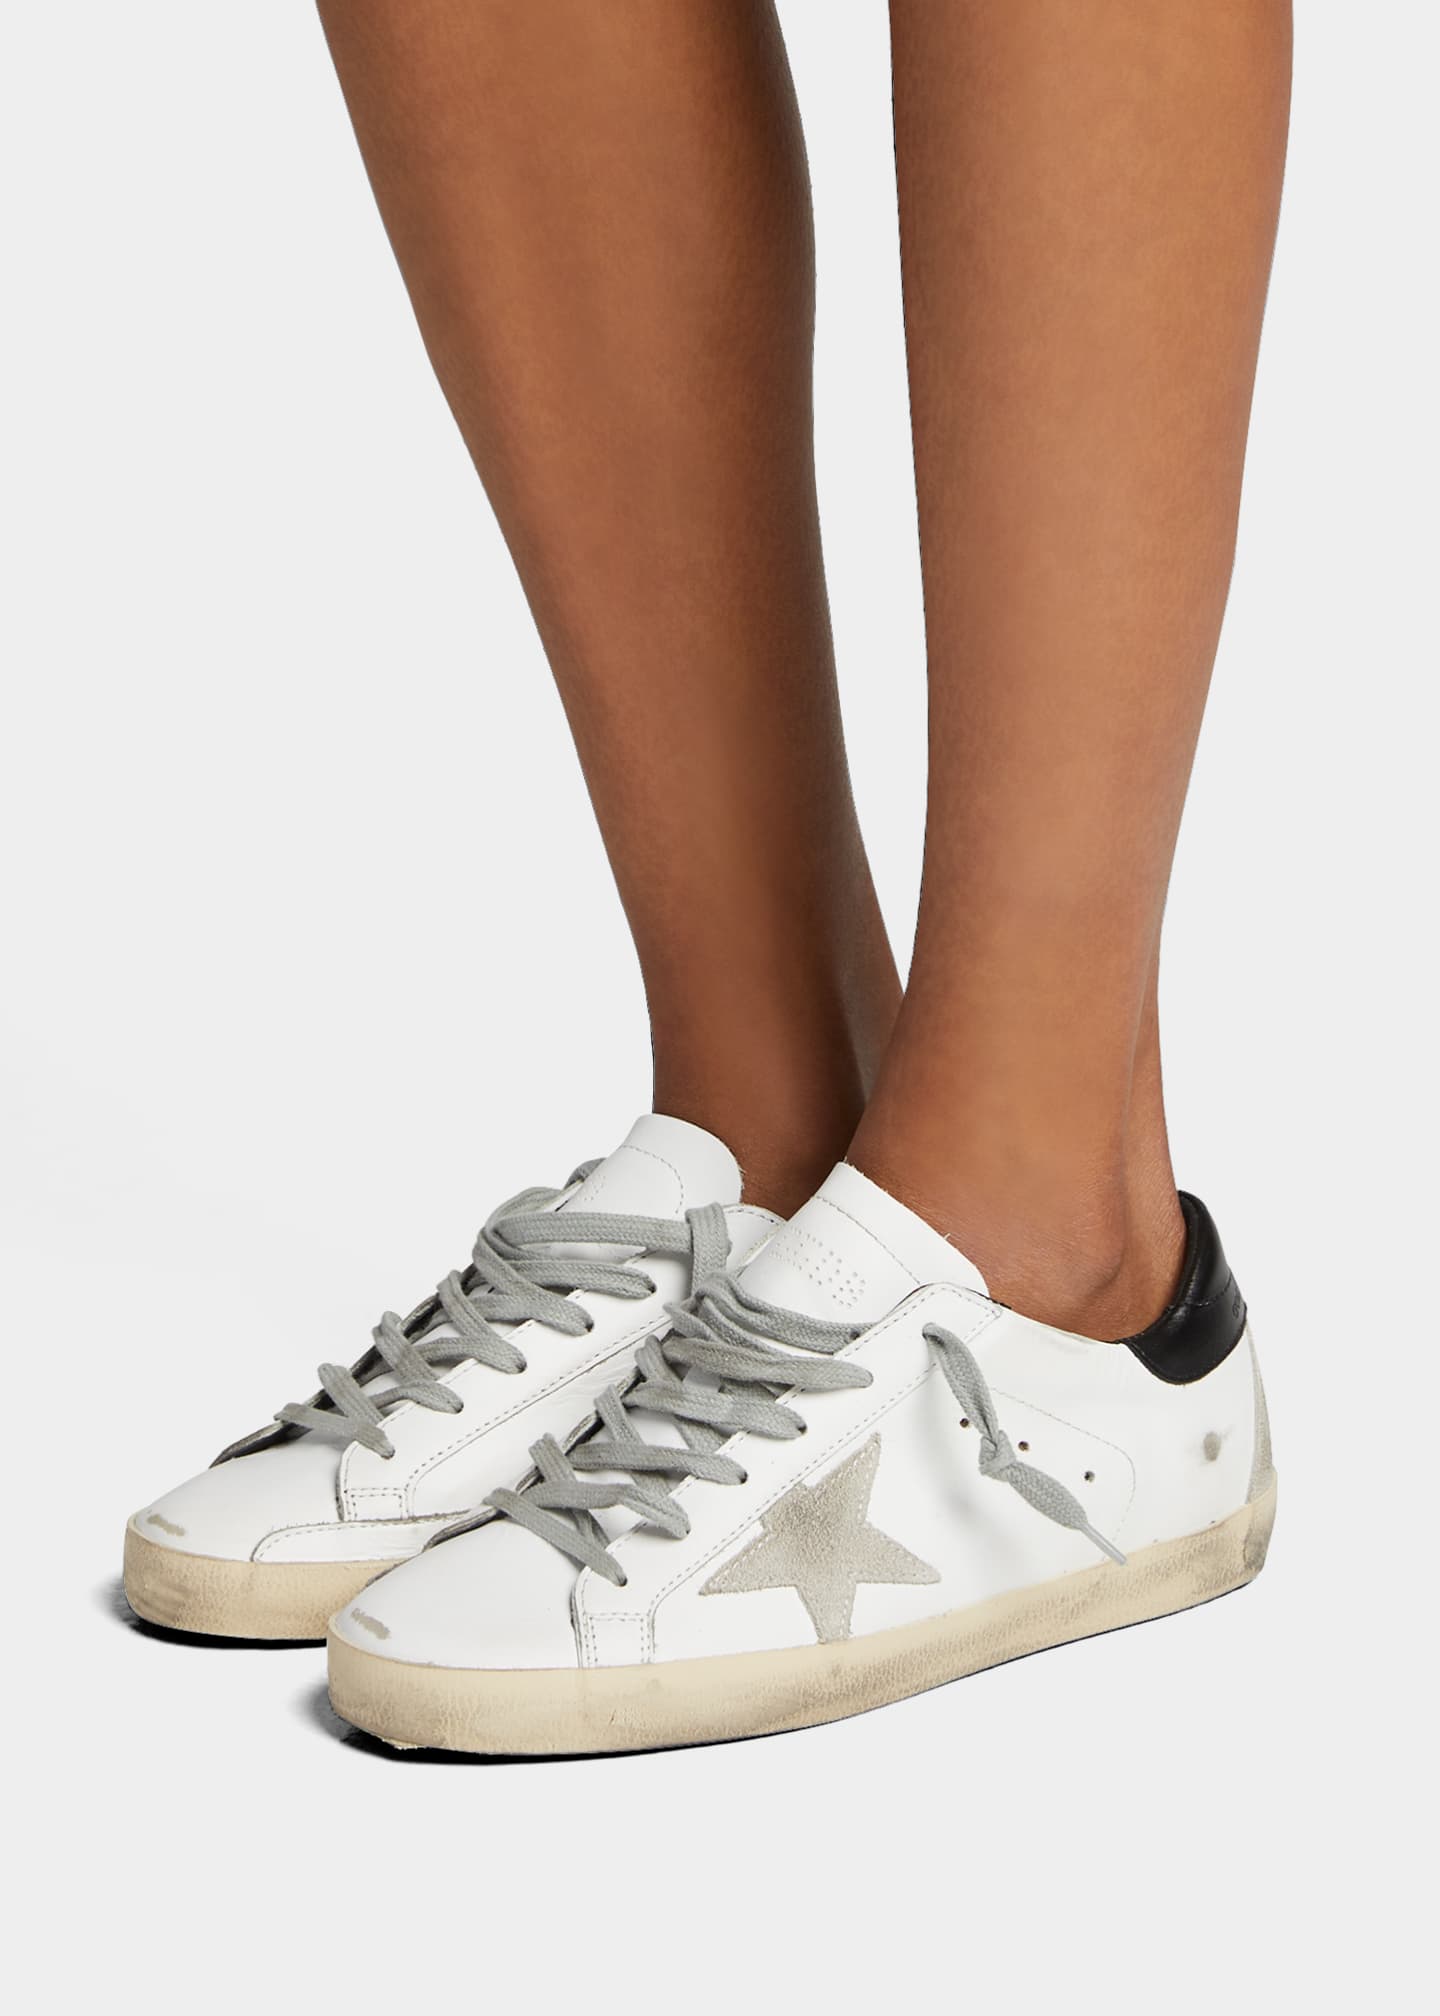 Golden Goose Distressed Leather Sneakers, White Pattern - Bergdorf Goodman